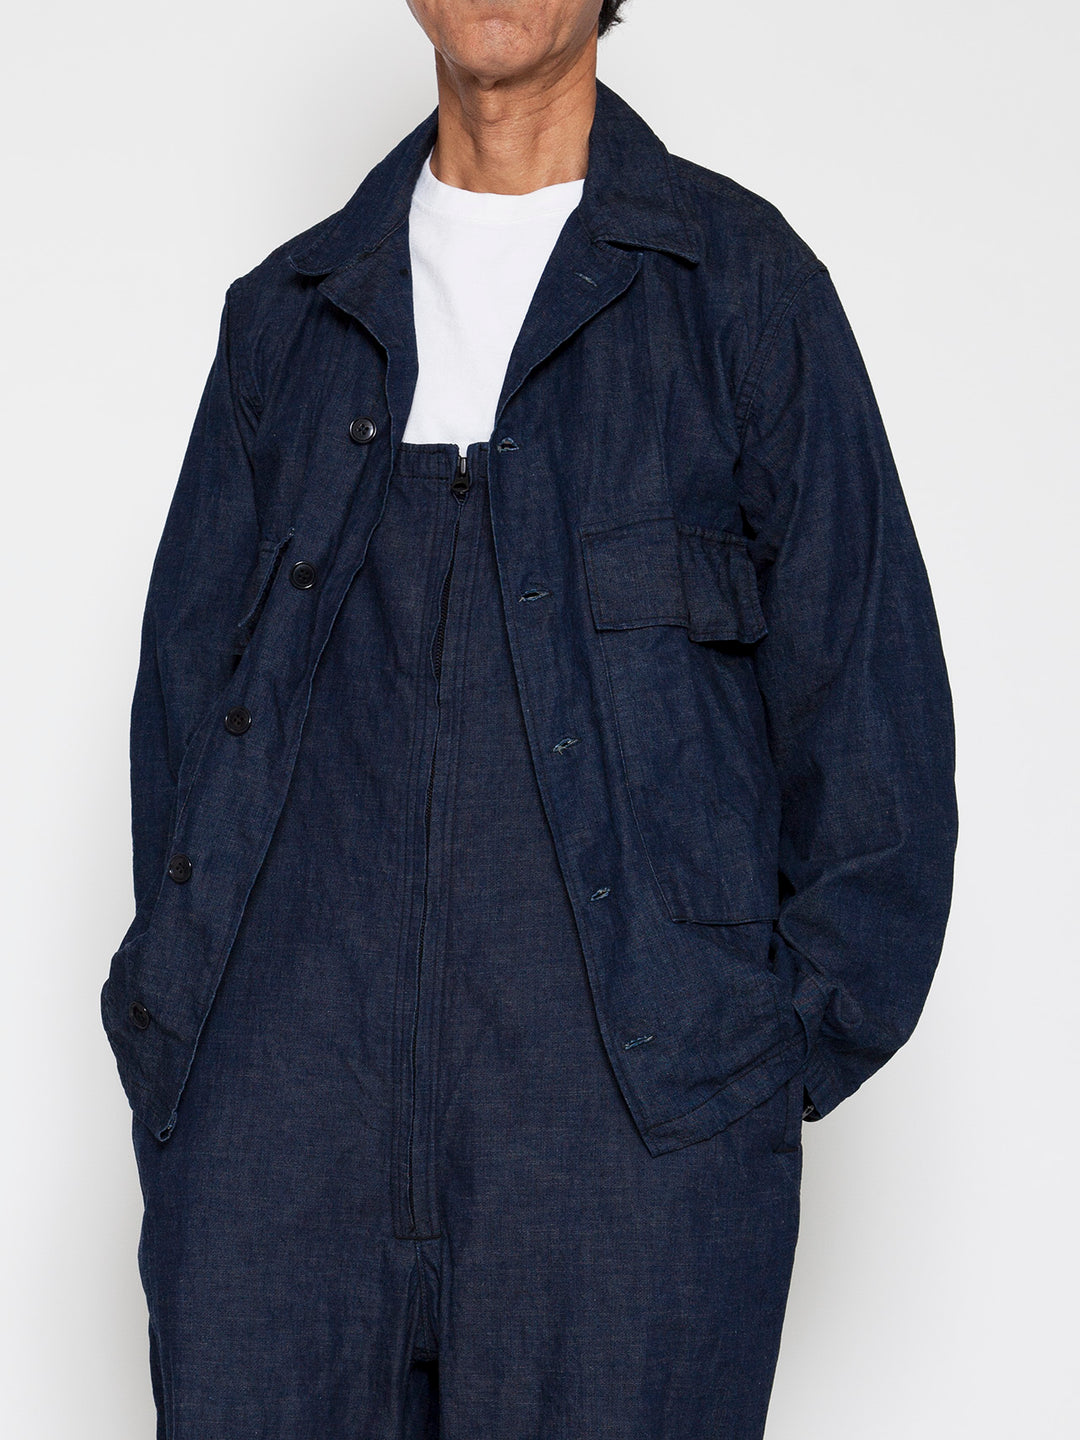 【DELIVERY】THE CORONA UTILITY - NAVY UTILITY JAC SHIRT